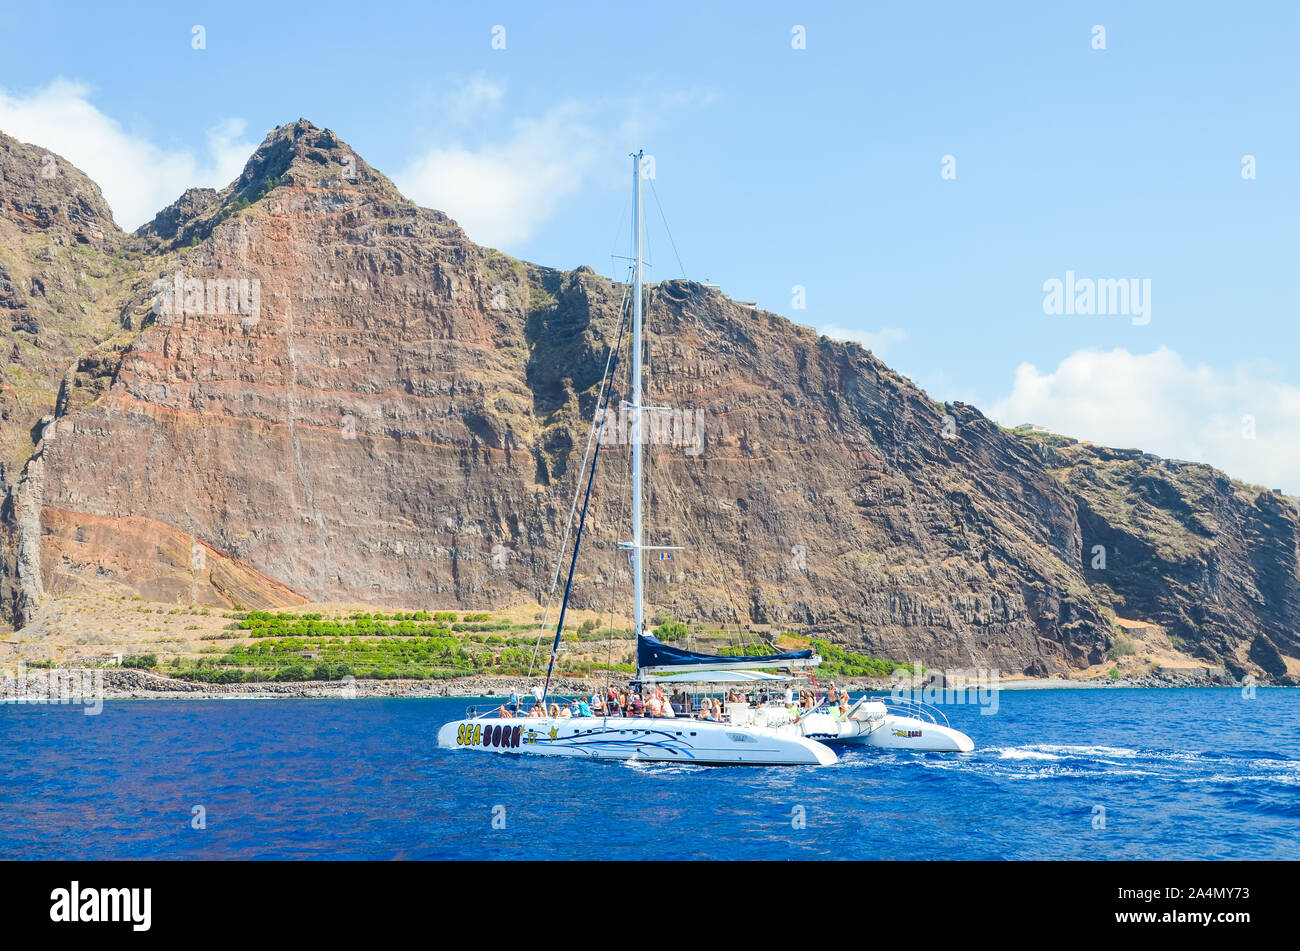 Madeira, Portugal - Sep 10, 2019: Tourist sightseeing boat with people in the waters of the Atlantic ocean. Rocks on Madeira island in the background. Whale watching, dolphin watching trips. Stock Photo